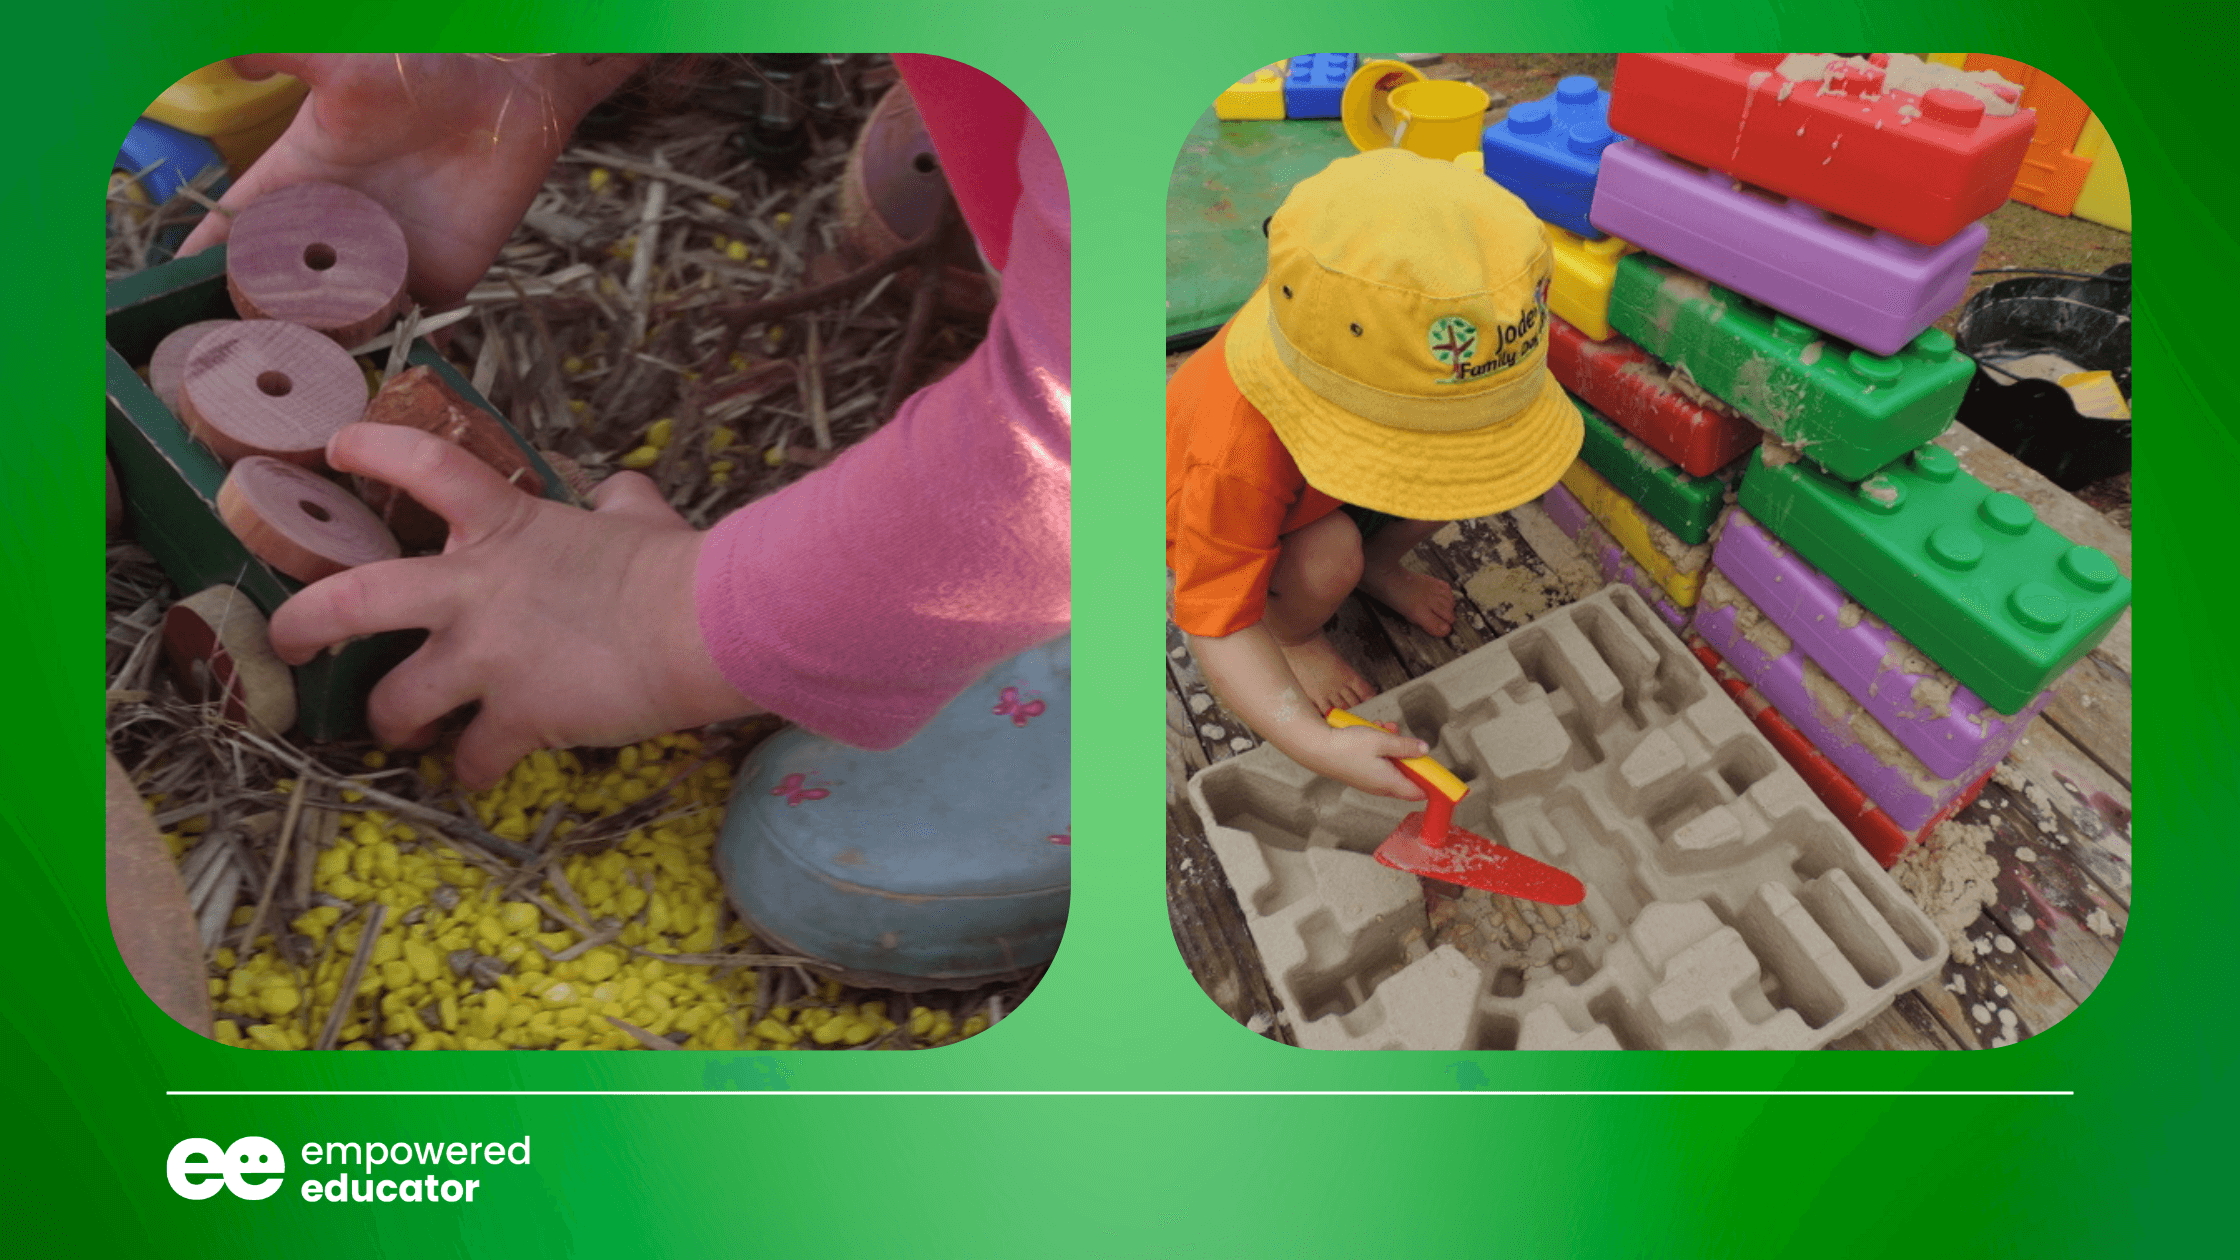 hands-on STEAM activities designed for early childhood learning environments